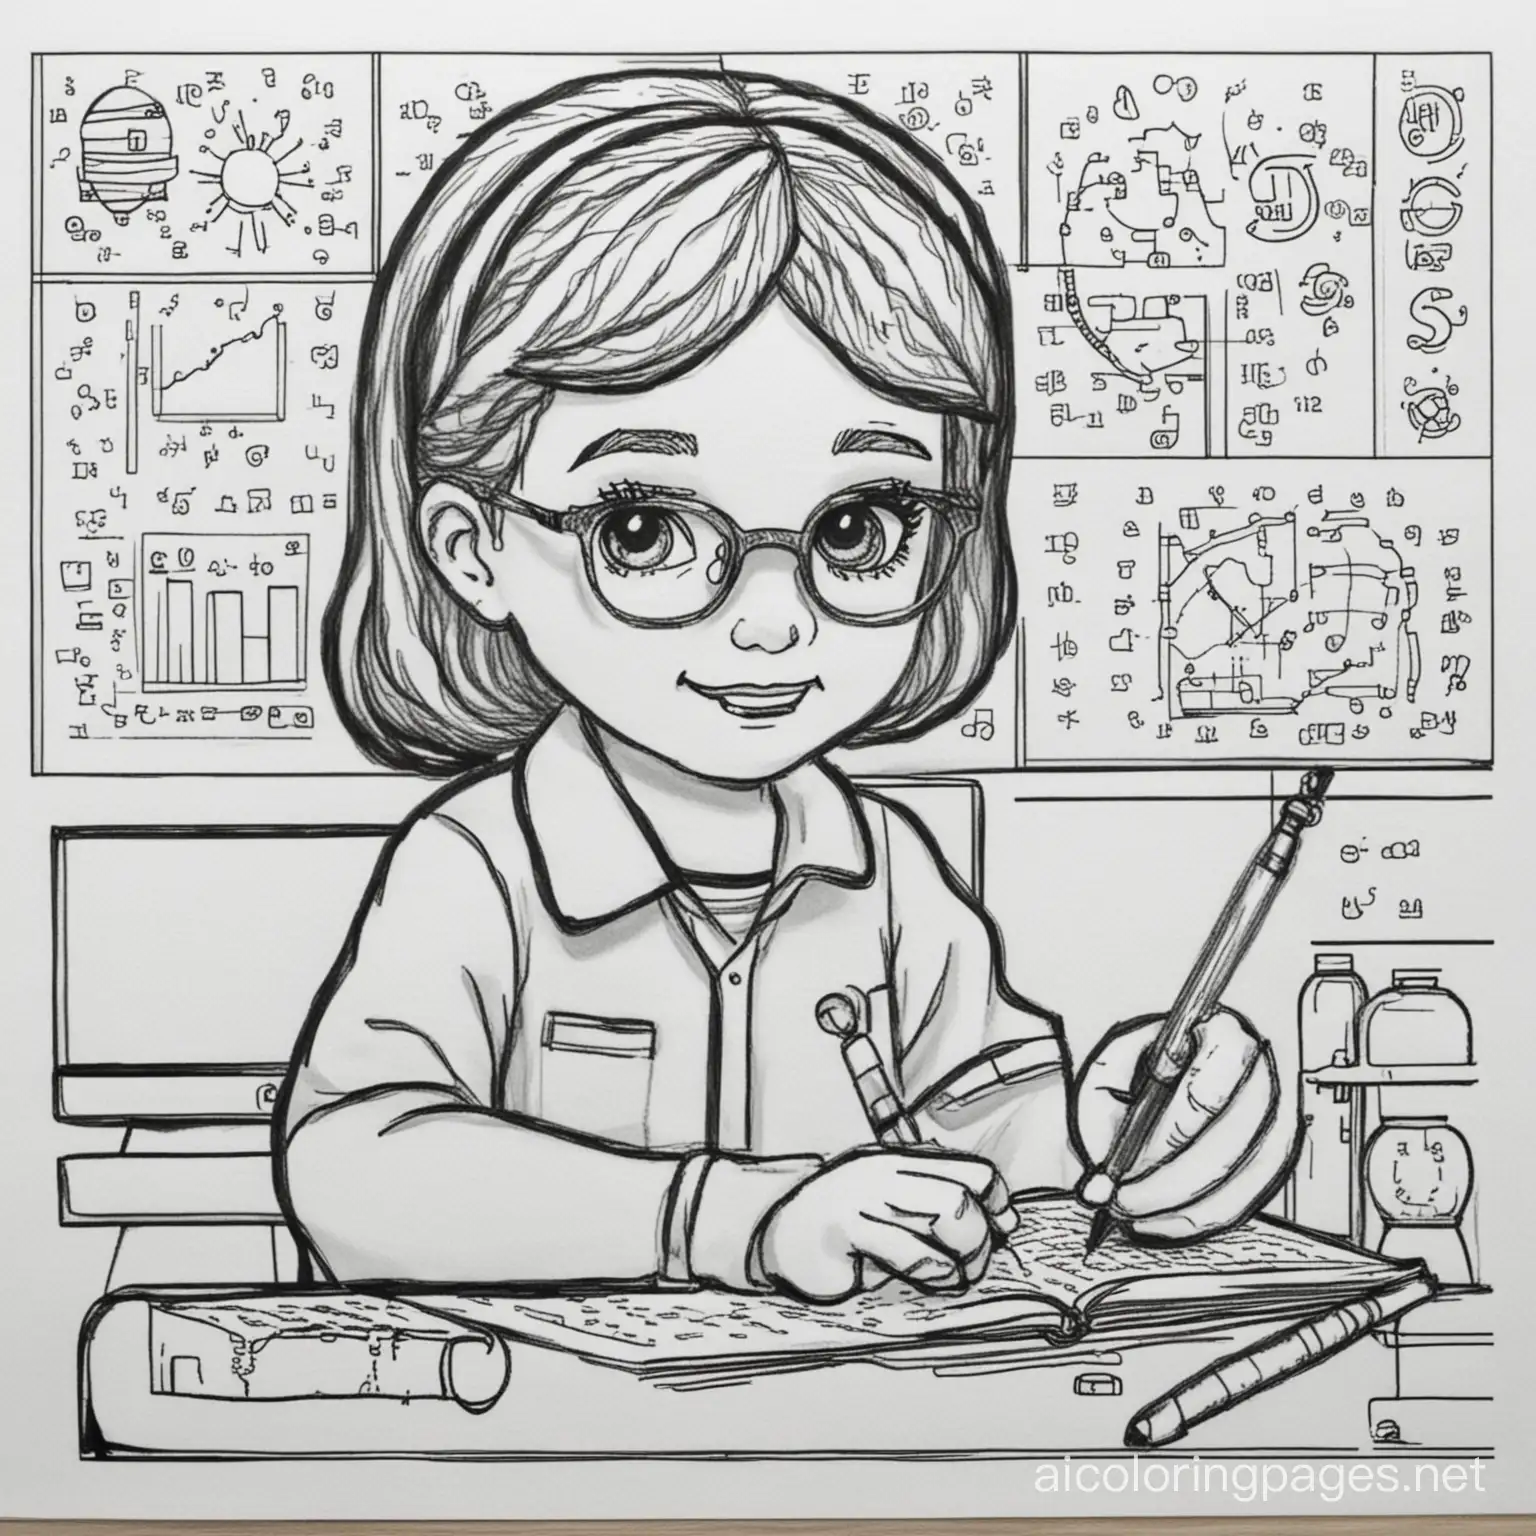 Learn-Data-Science-Coloring-Page-Simple-Line-Art-for-Kids